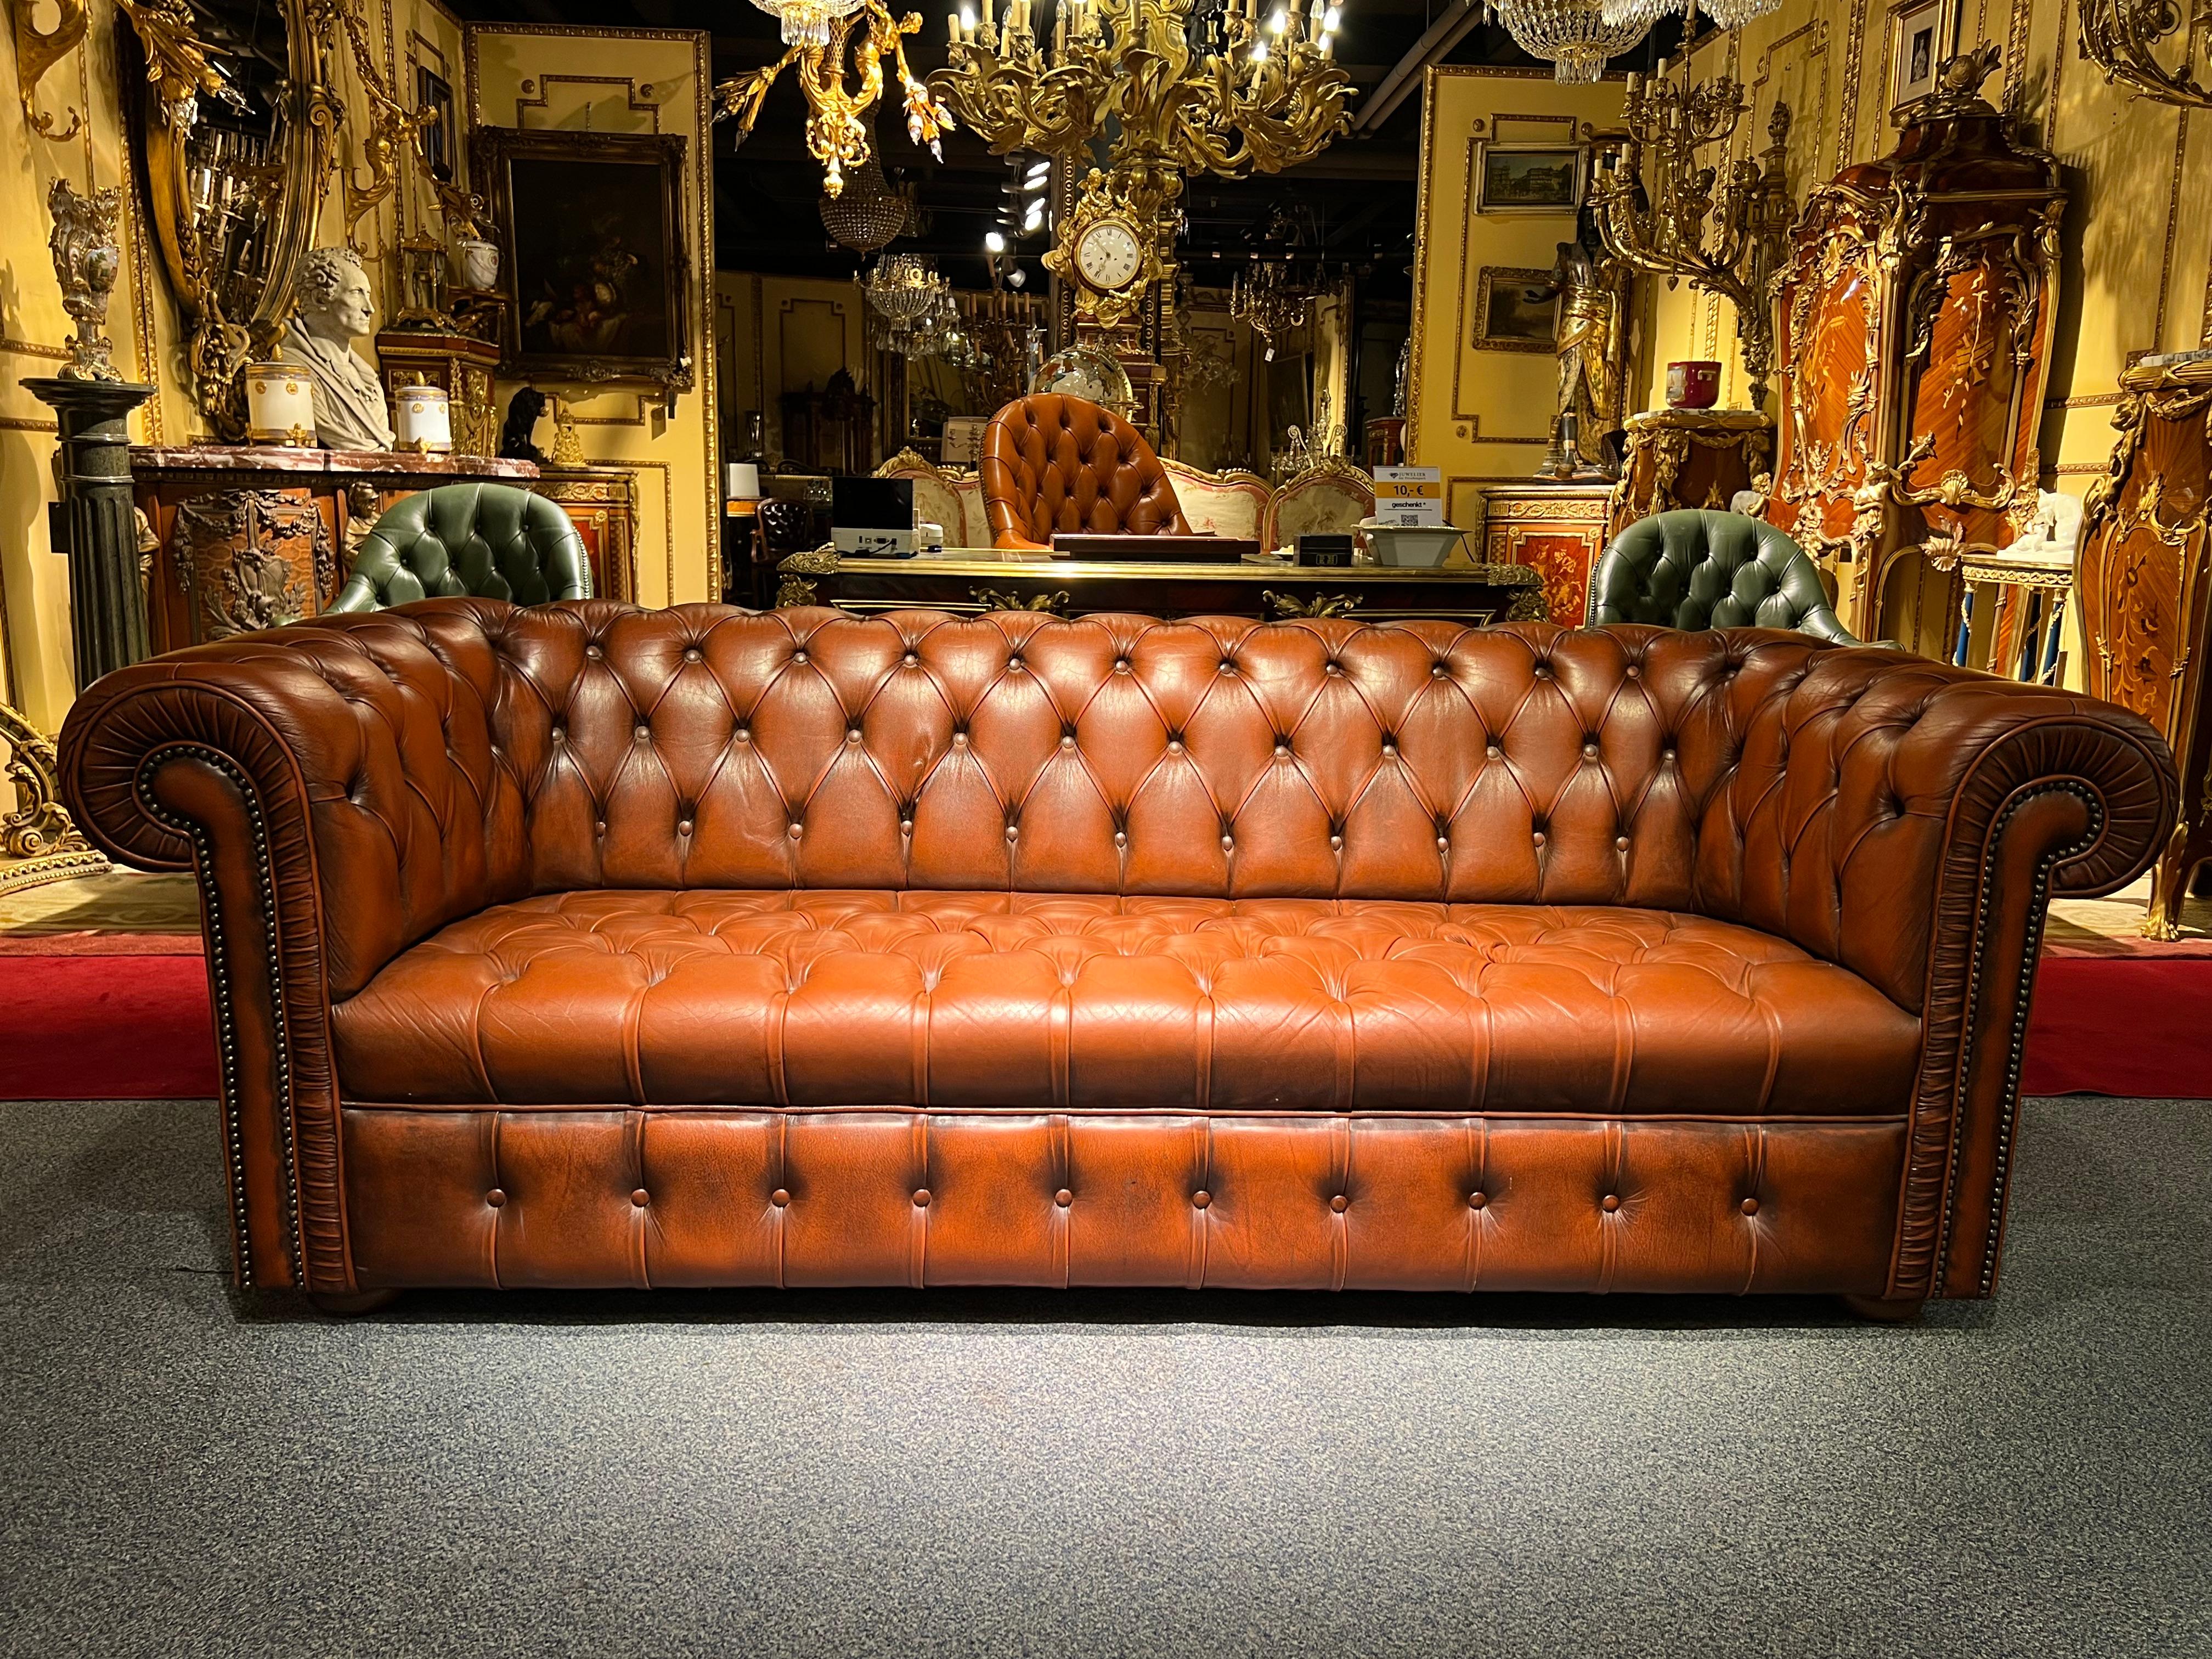 Late 20th century leather Chesterfield sofa. One of the most elegant models with button down seating, this is a fashionable evergreen capable of uplifting the interior space of any contemporary or traditional home, the Classic colour combining